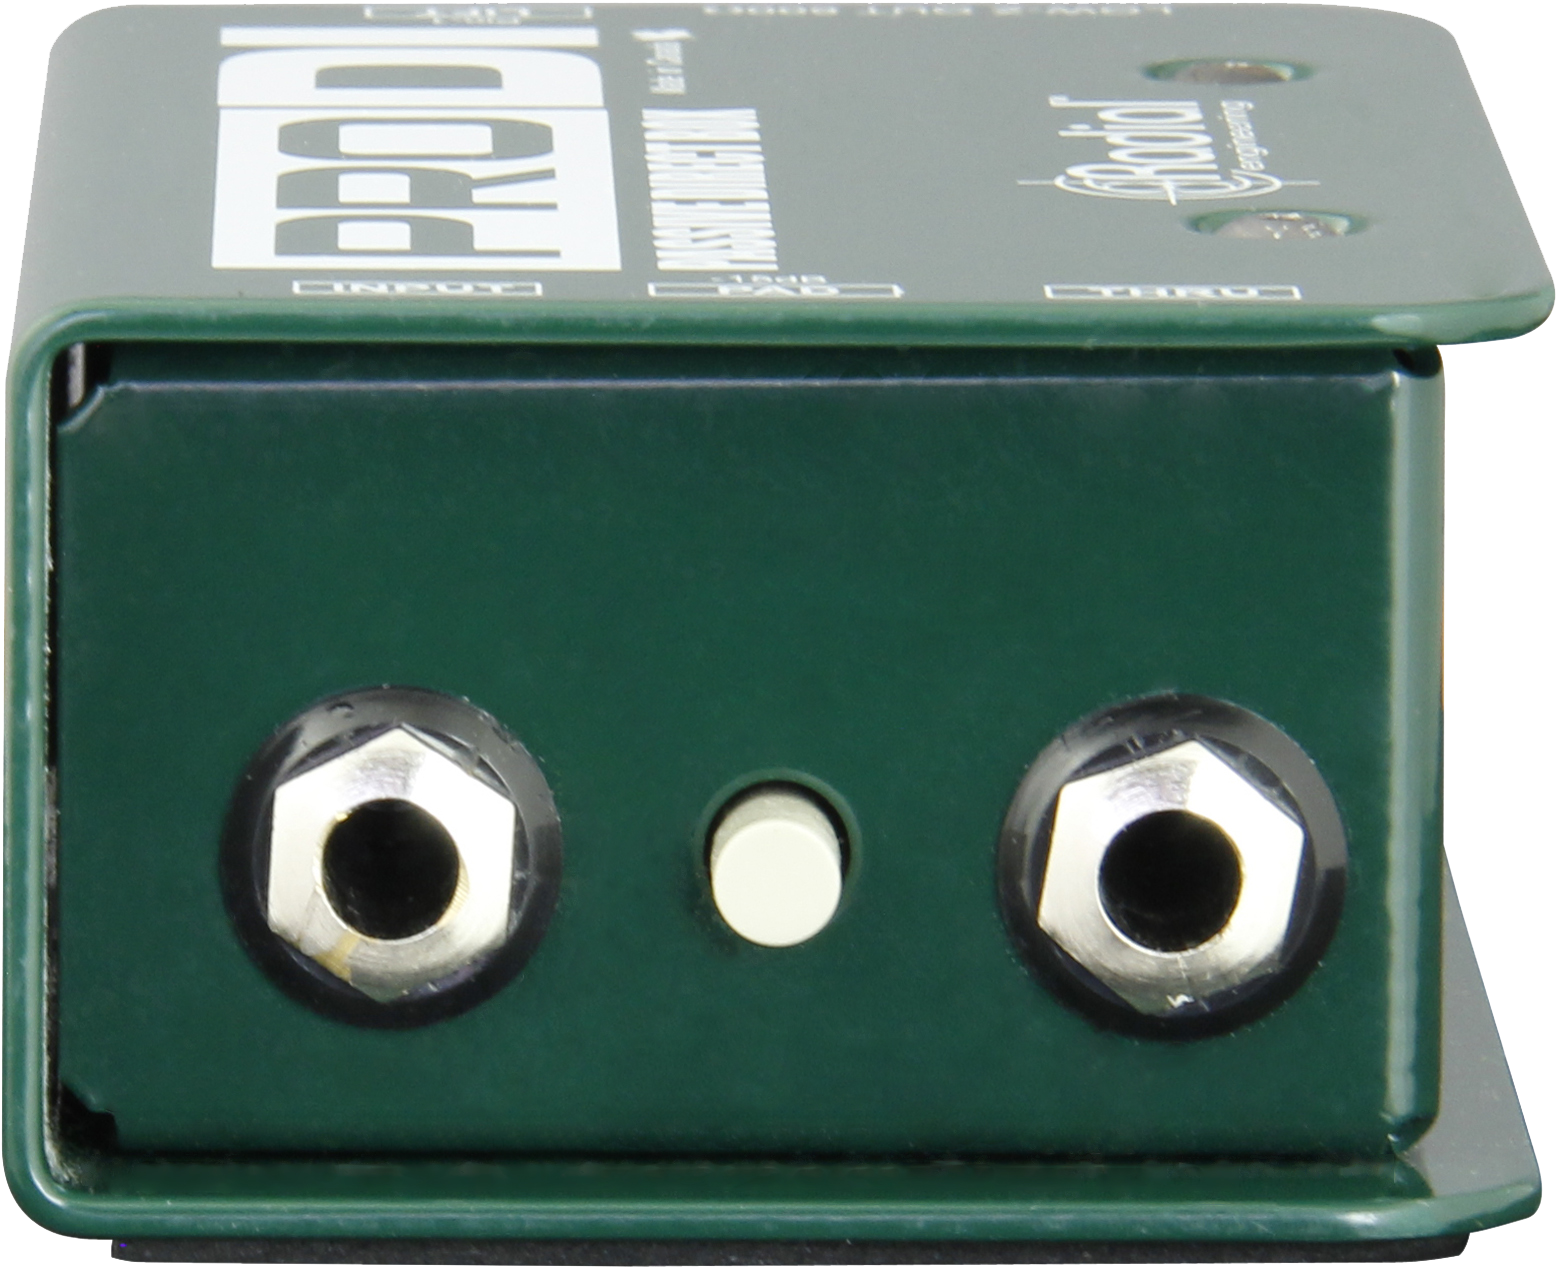 Left side of Radial Pro DI Direct Box.